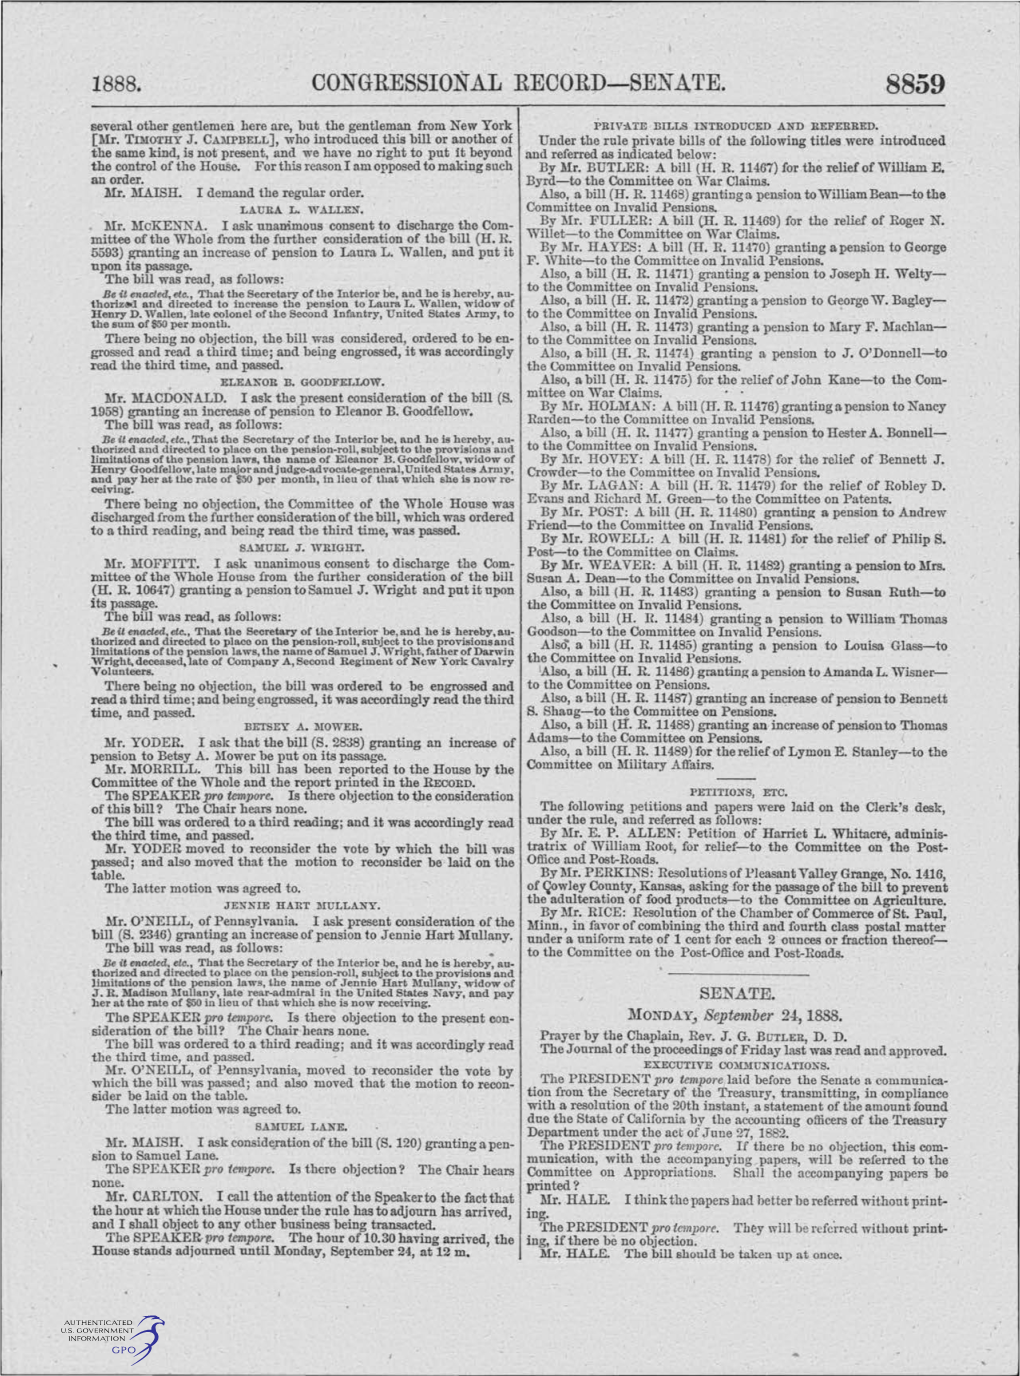 CONGRESSIONAL RECORD- SENATE. 8859 ' Several Other Gentlemen Here Are, but the Gentleman from New York PRIV~TE BILLS INTRODUCED .AND REFERRED